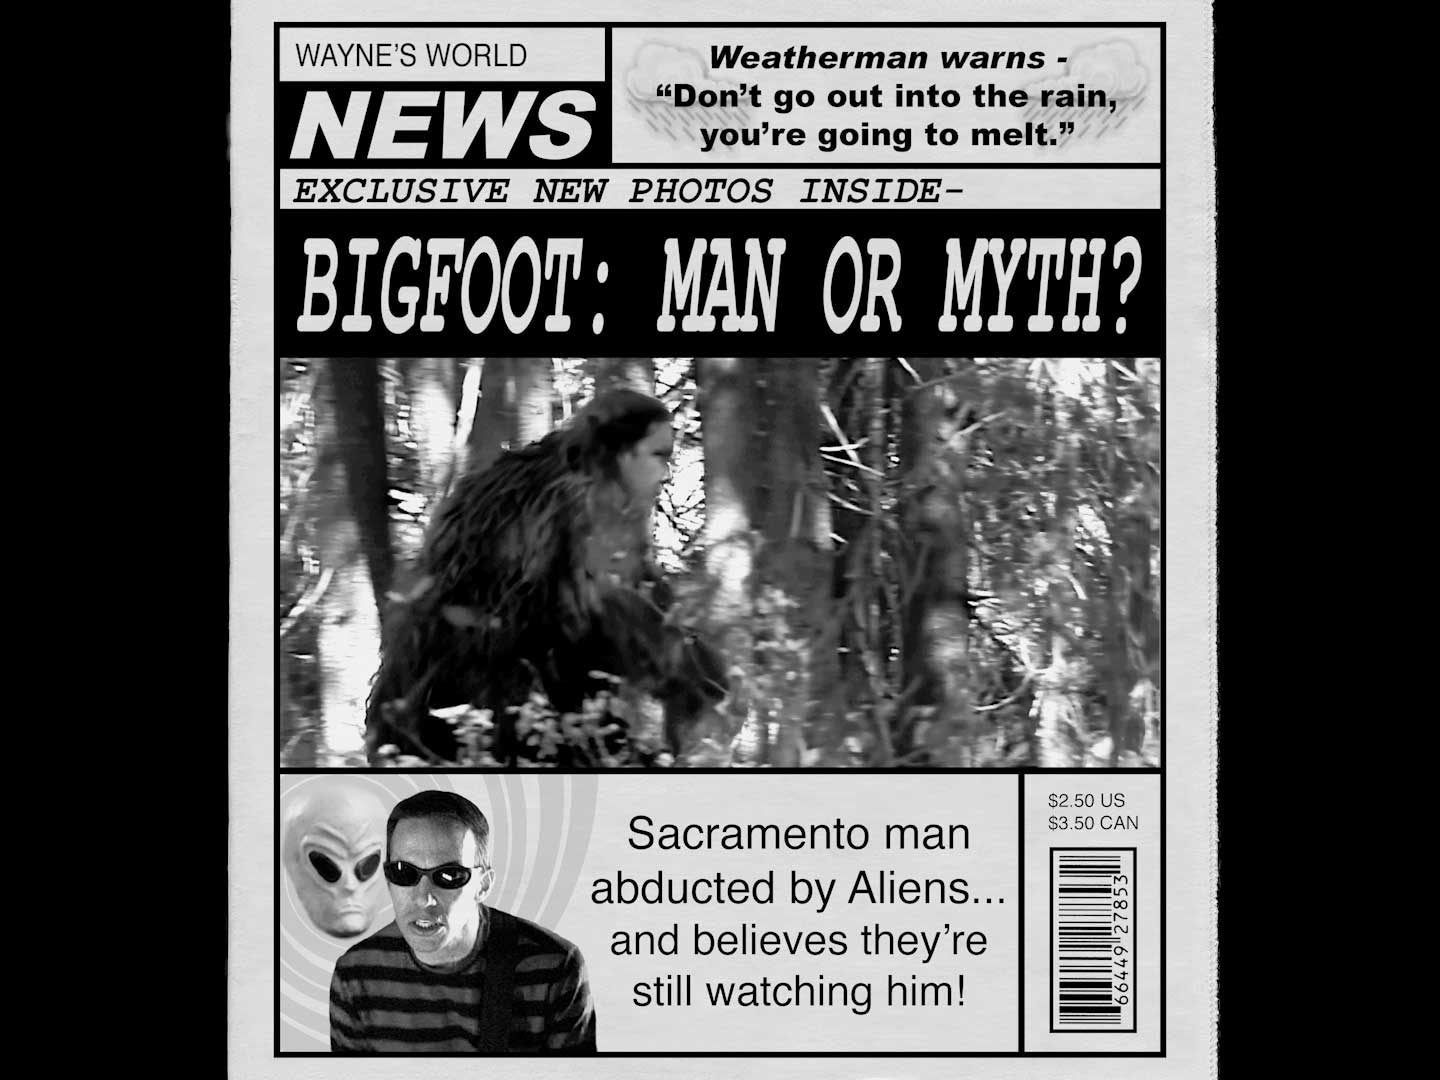 A newspaper featuring a headline about Bigfoot and the question of whether he is a man or myth, along with articles on the Groovie Ghoulies Music Video and Running with Bigfoot.